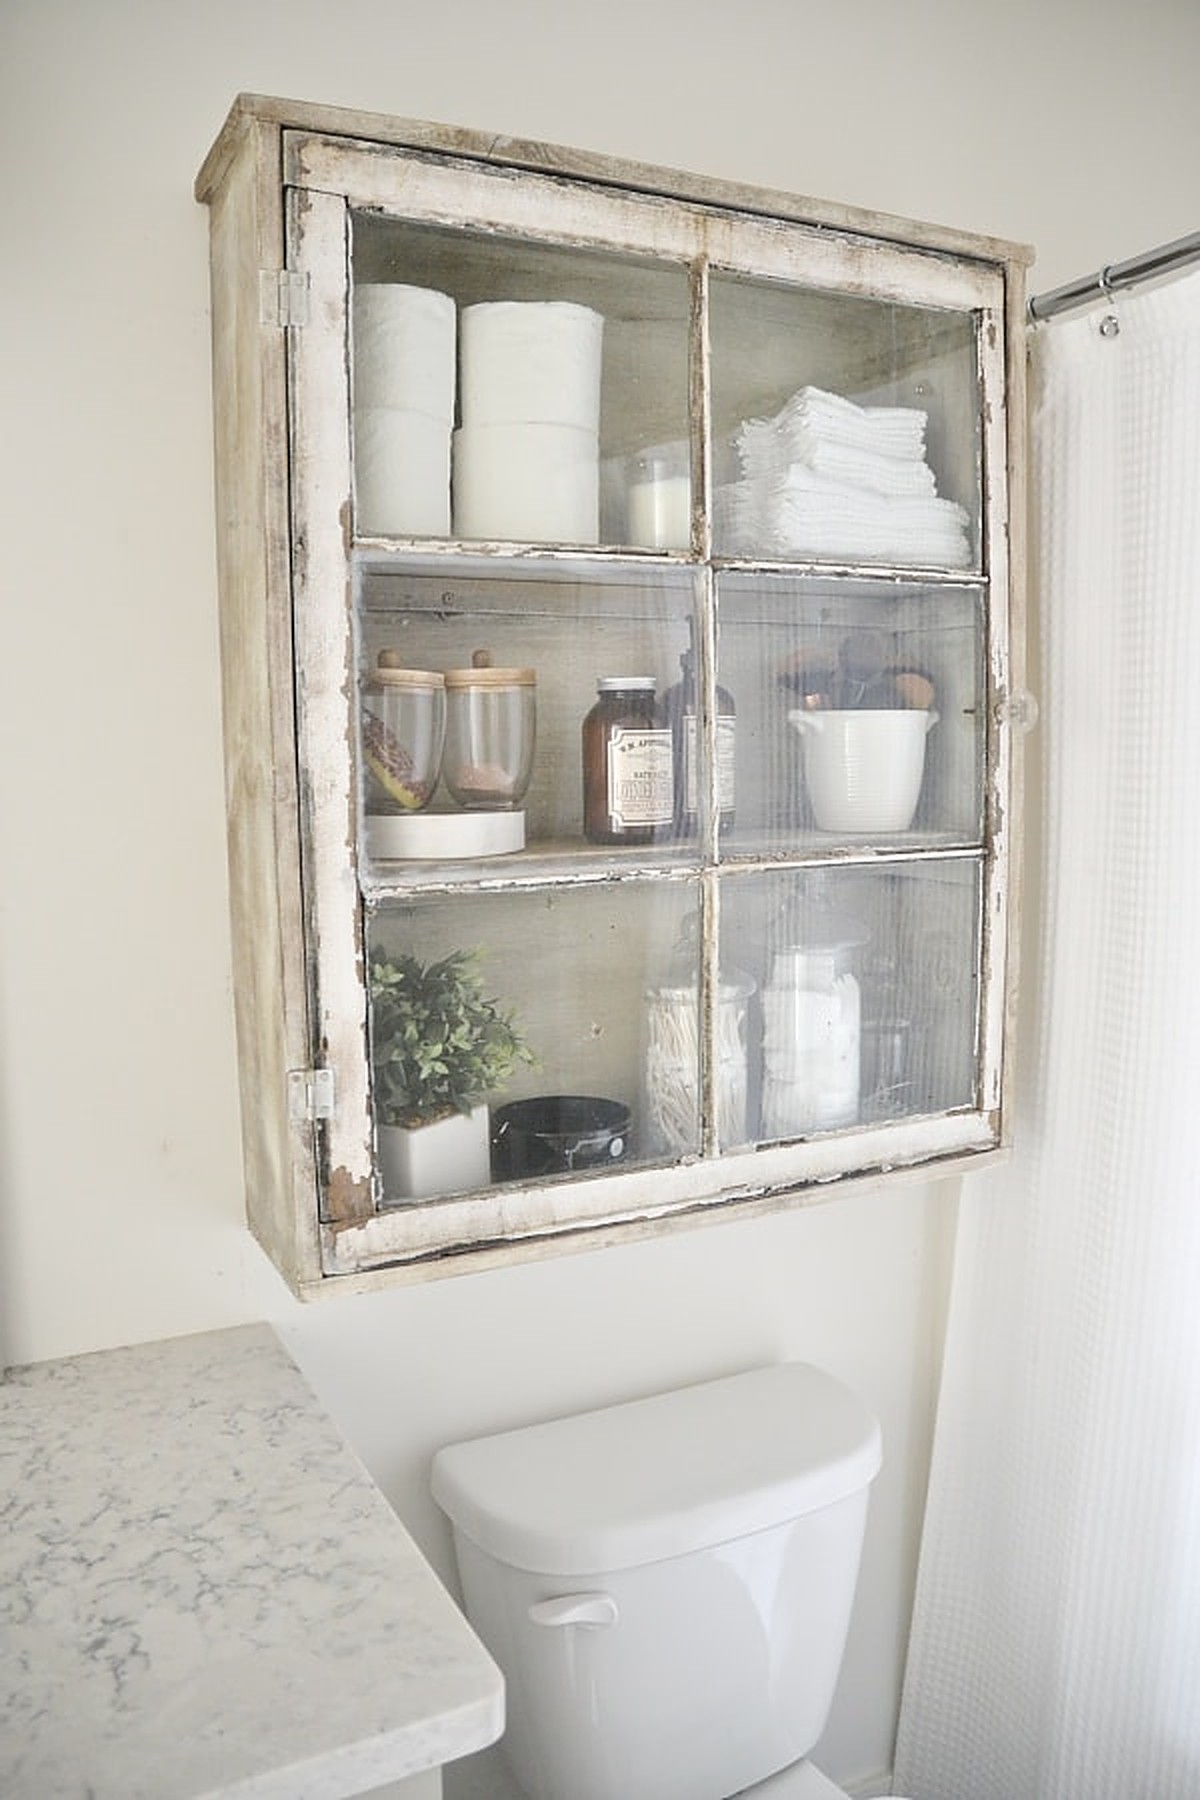 Old white cabinet full of things above toilet